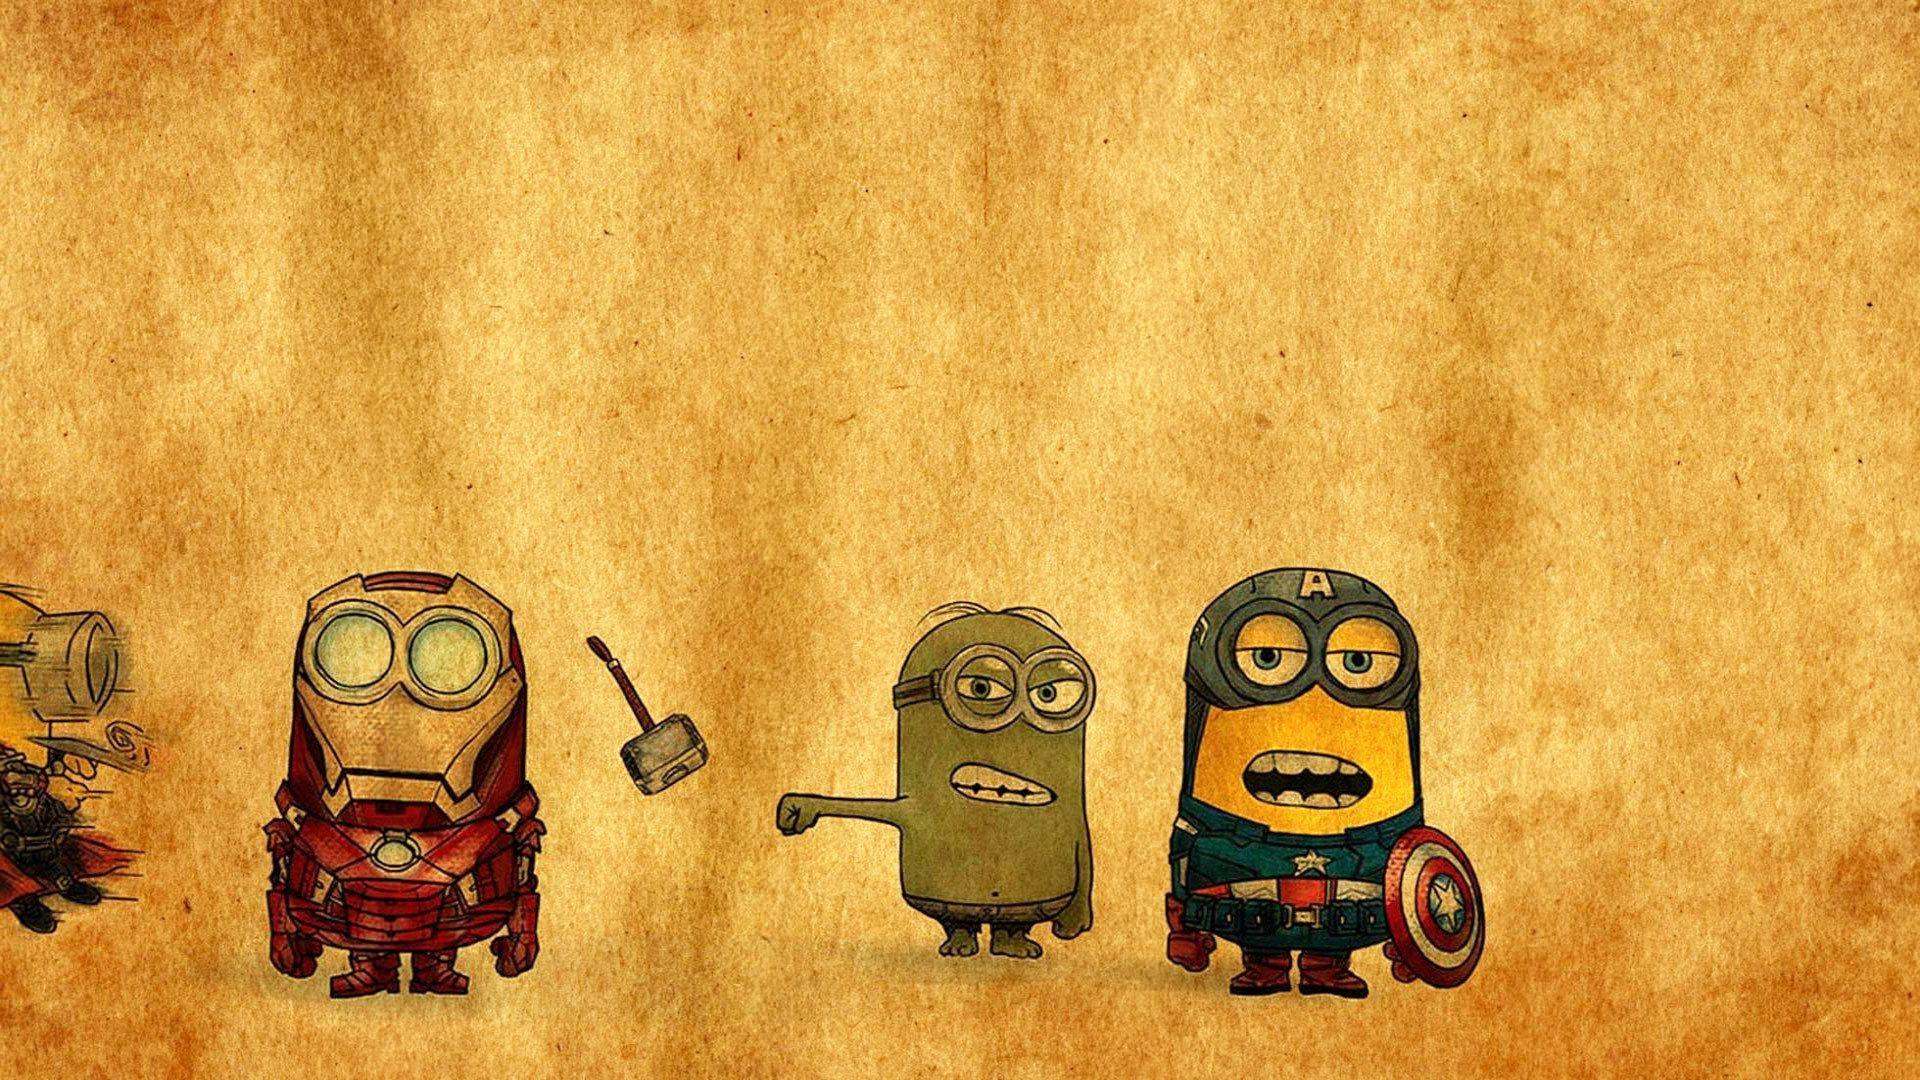 Minions superheroes wallpaper and image, picture